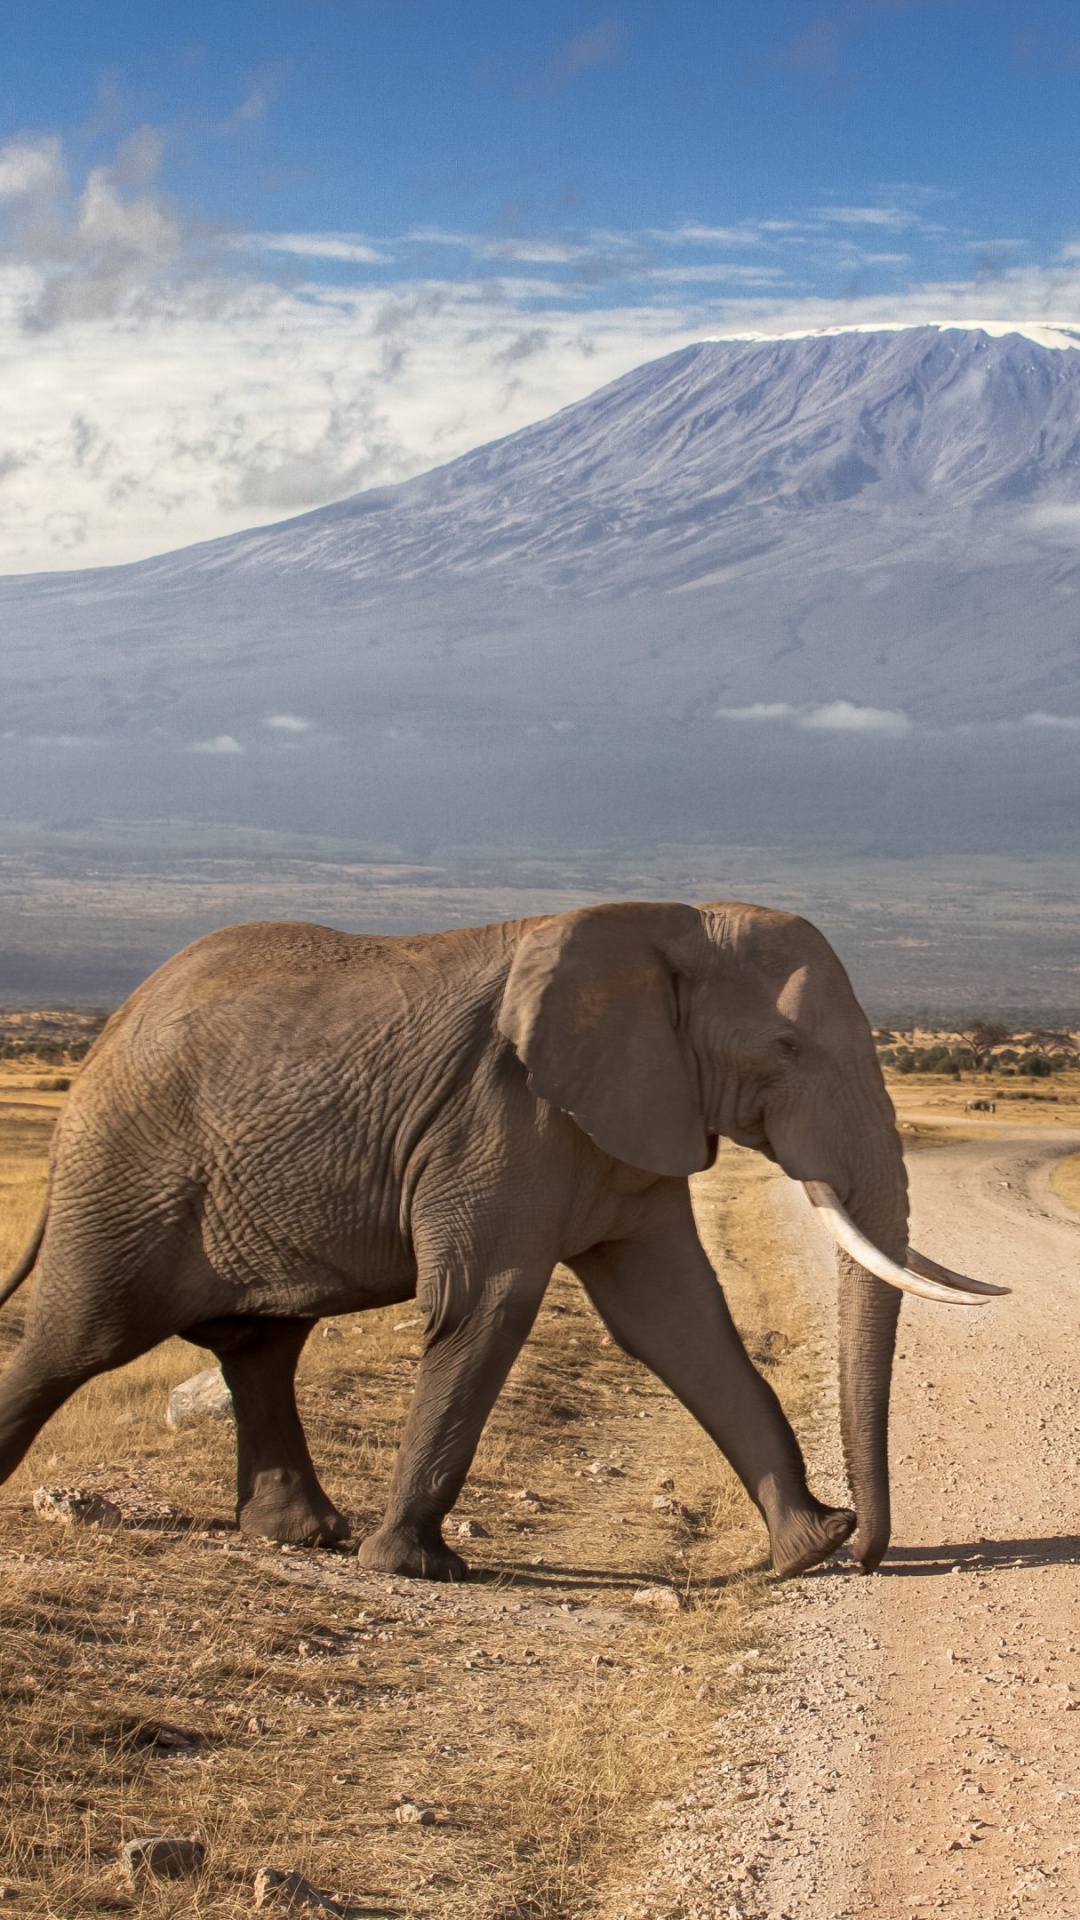 Elephant Walking on Road During Daytime. Wallpaper in 1080x1920 Resolution